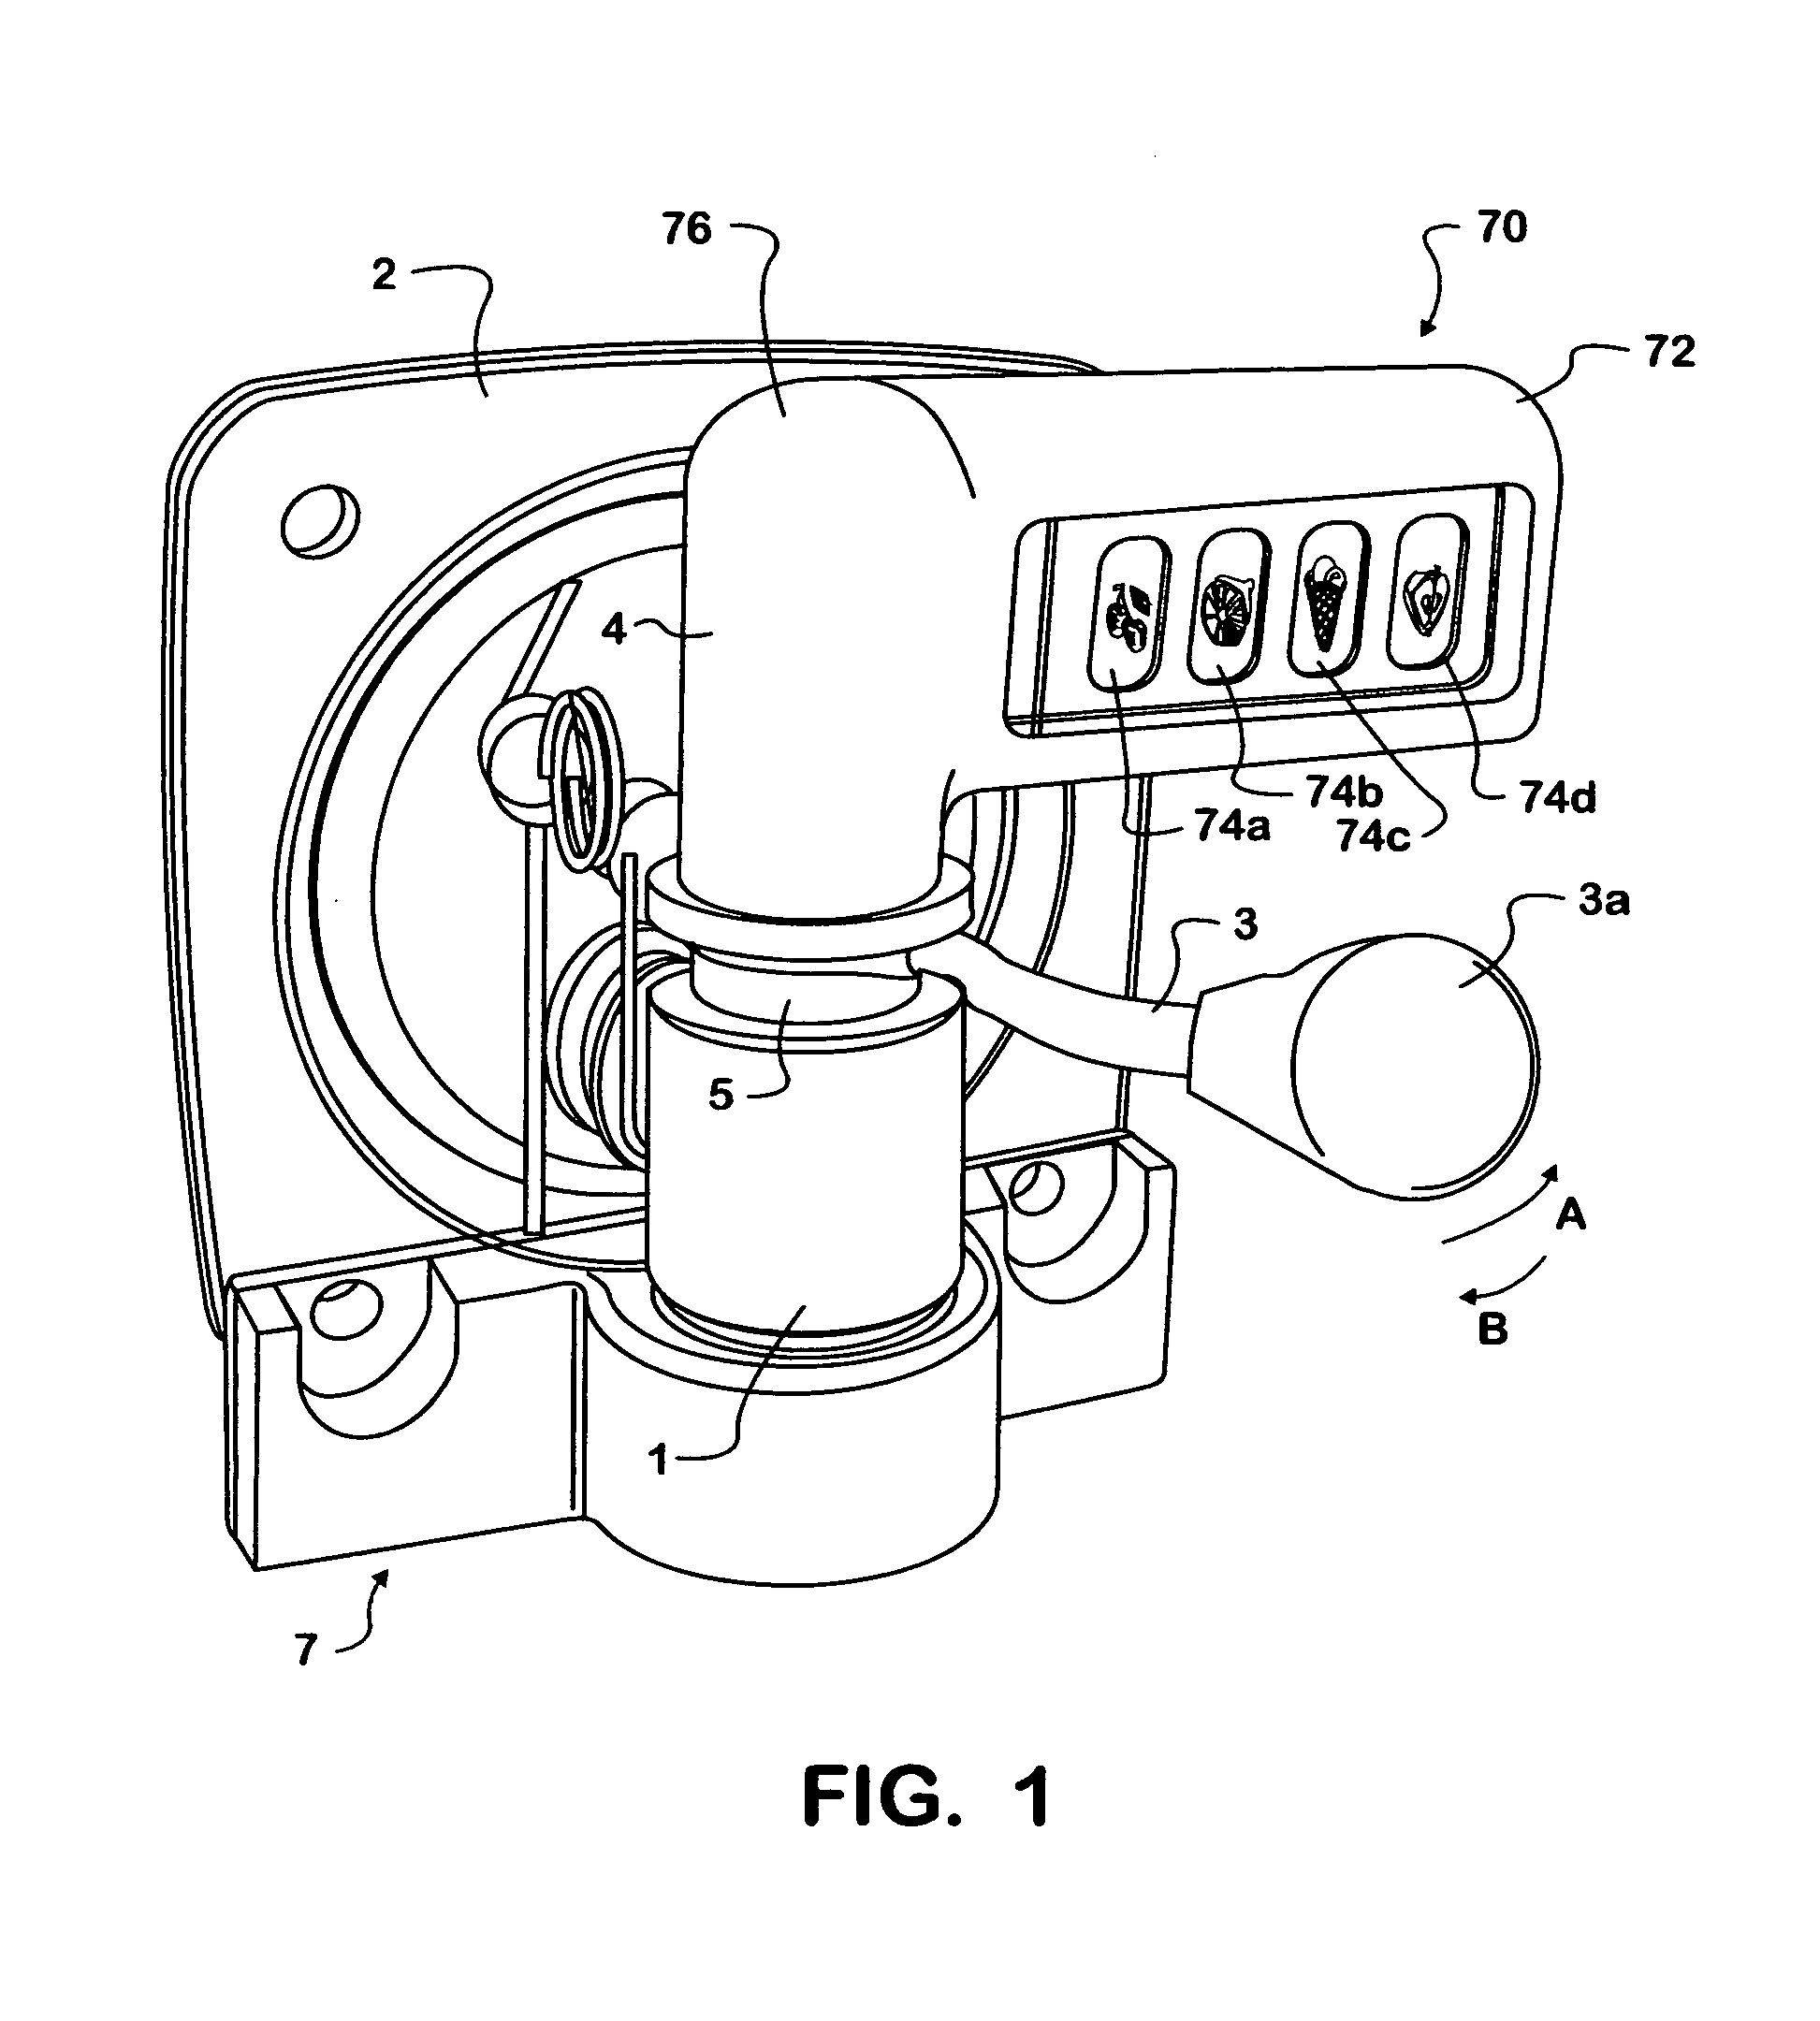 Device for injecting additive fluids into a primary fluid flow